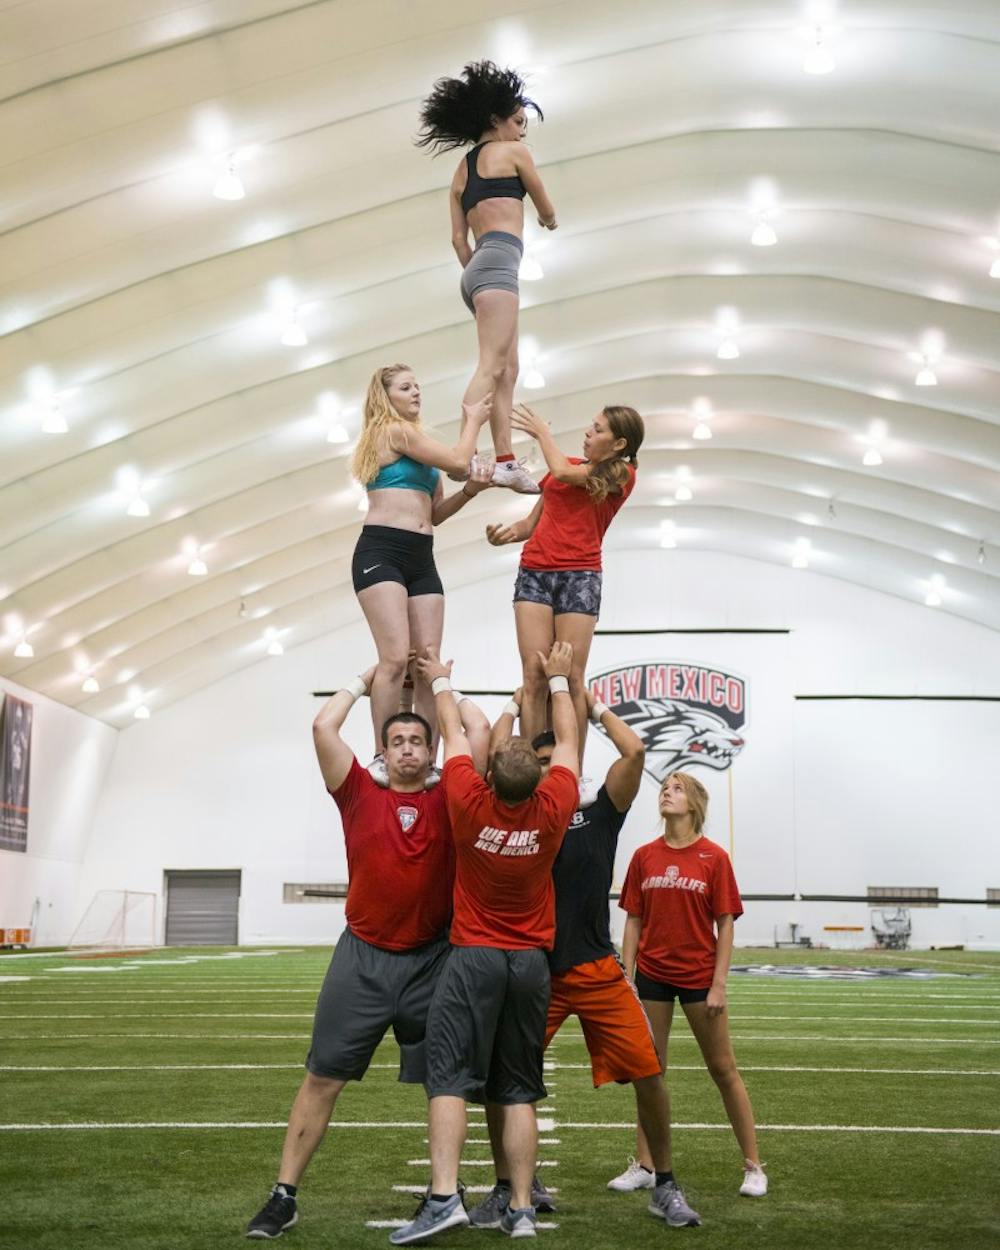 The New Mexico spirit squad practices drills at the Football Indoor Practice Facility Aug. 9, 2015.